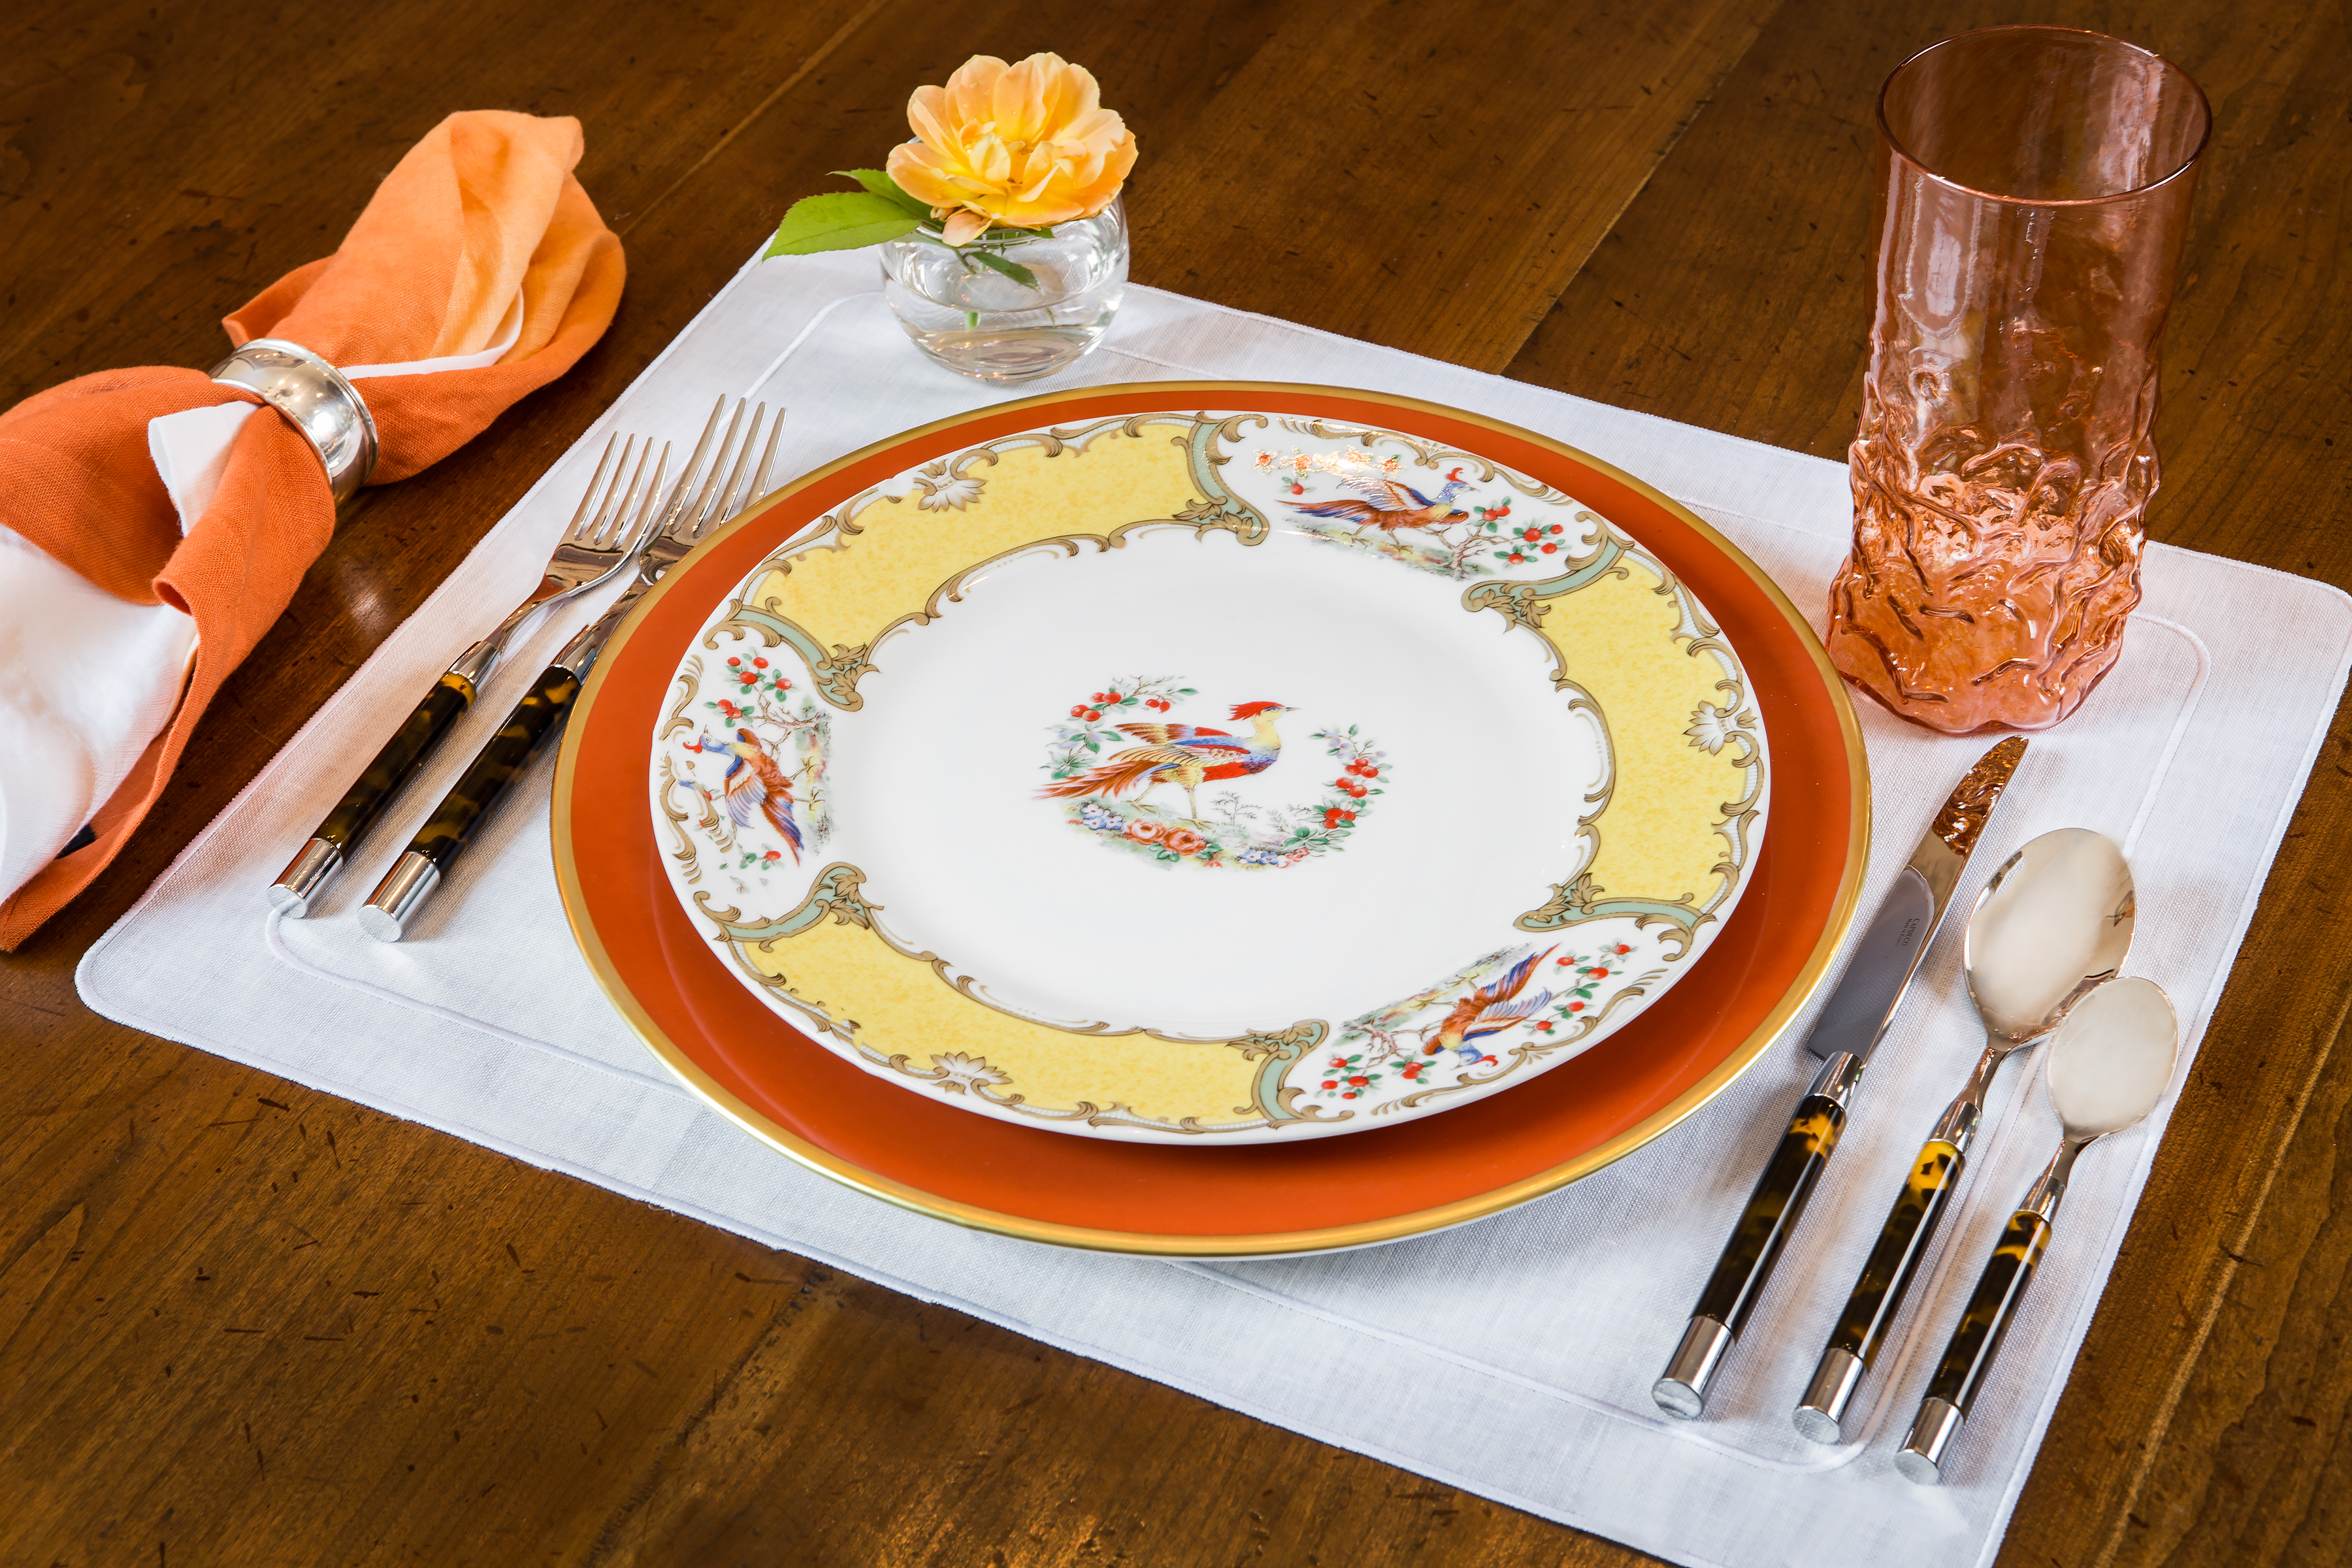 To set a swanky cocktail supper, add a modern Michael Aram Orange Dip Dye Napkin with Capdeco Conty Tortoise place setting from non(e)such. The yellow Andrea by Sadek dinner plate from a family collection is triumphant silhouetted on the blood orange charger from Anna Weatherley Designs, non(e)such. 